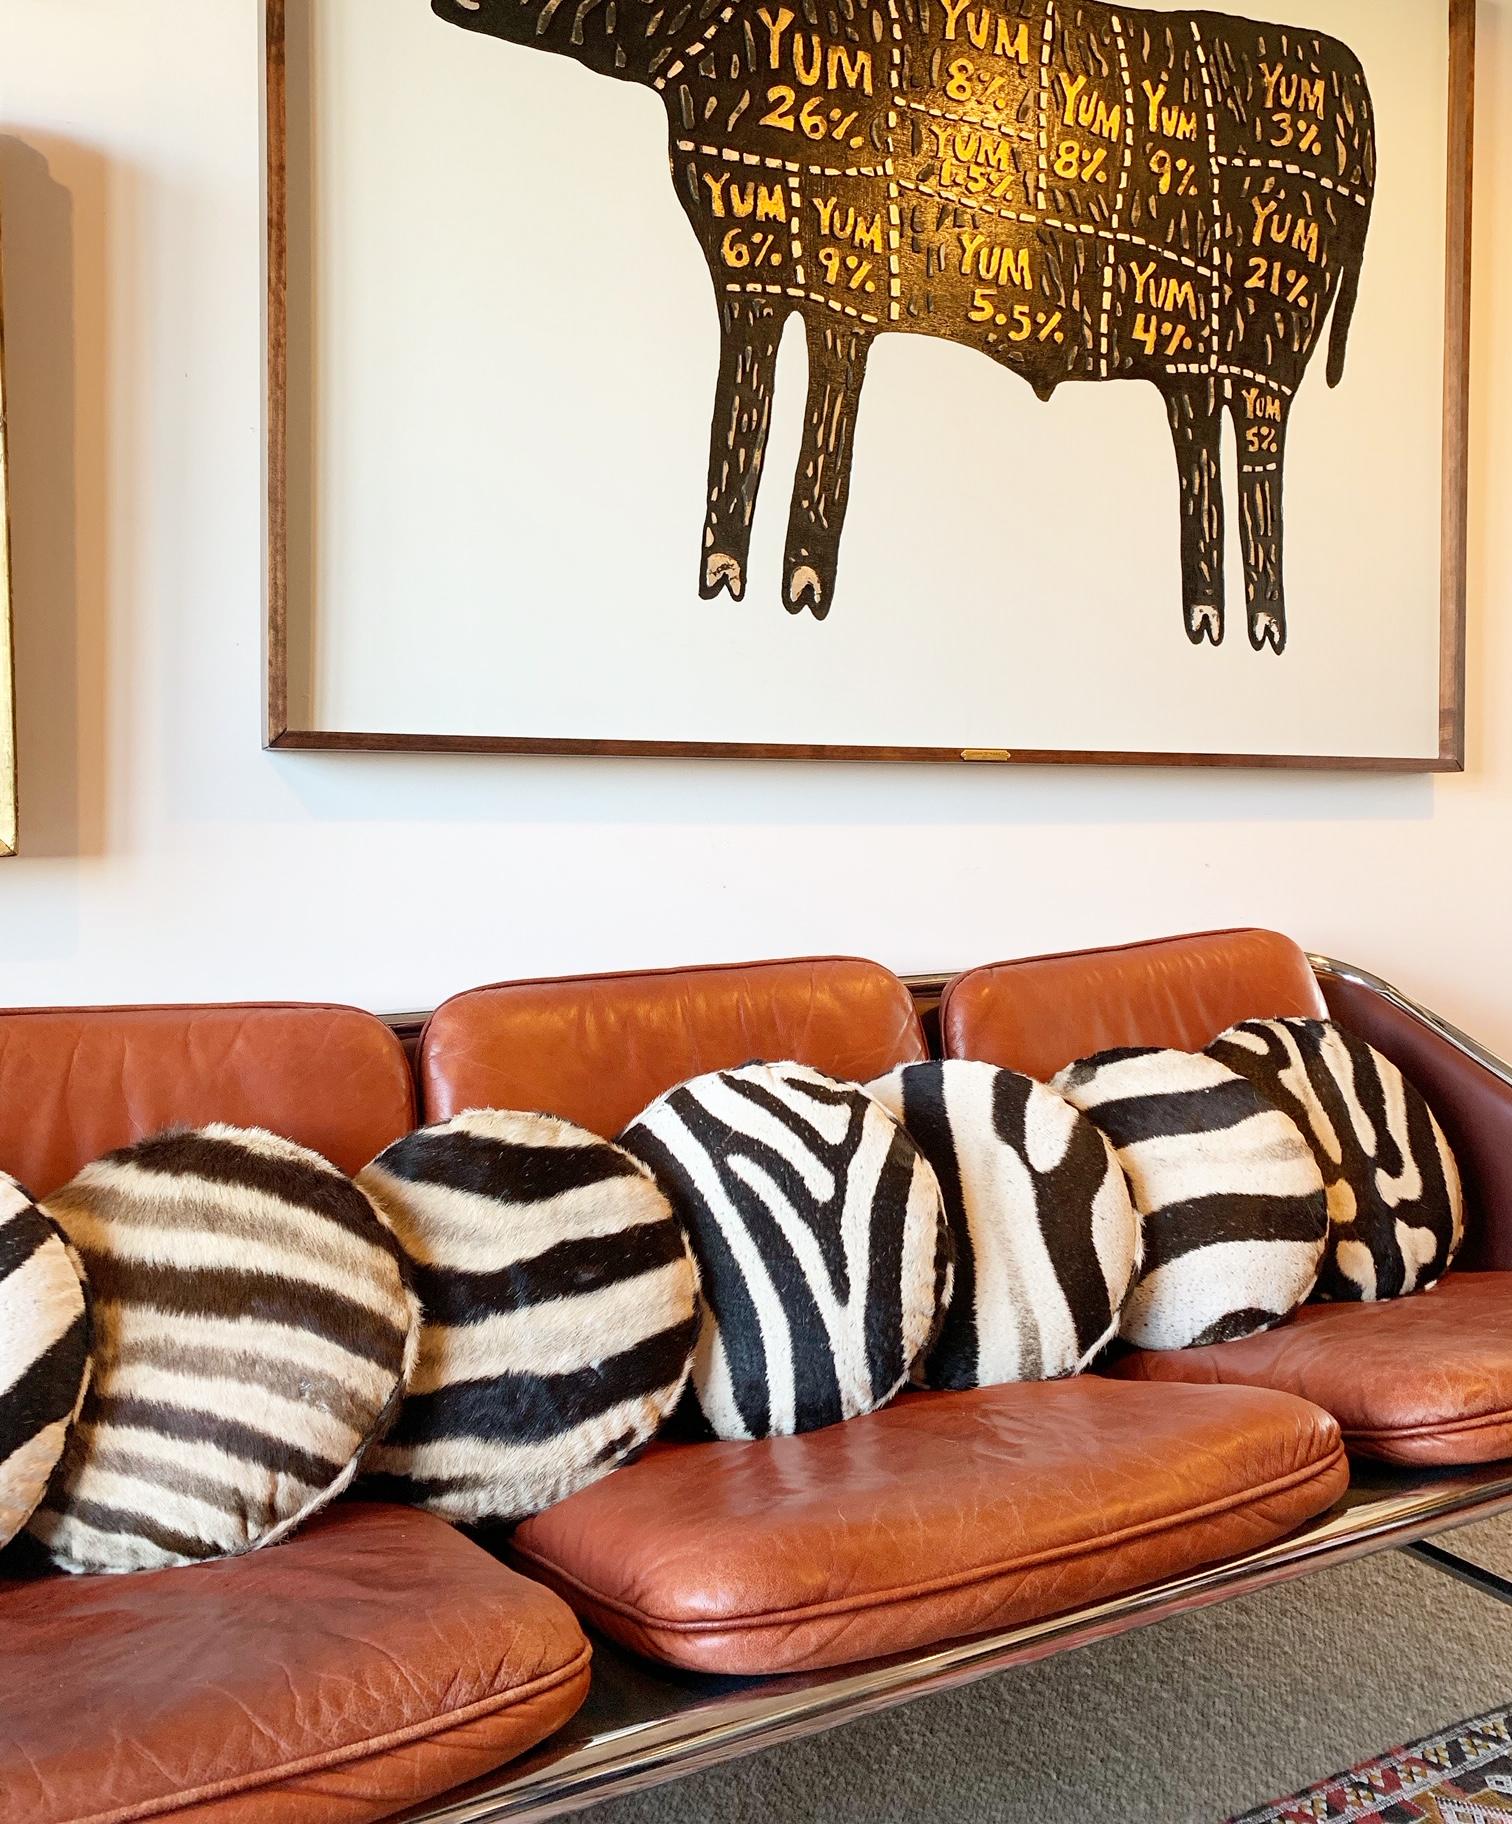 Our zebra hide squab pillows are handcrafted from our beautiful Forsyth zebra hides. The most beautiful zebra hides are selected, handcut, handstitched, and hand stuffed with the finest insert. Each step is meticulously curated by Saint Louis based